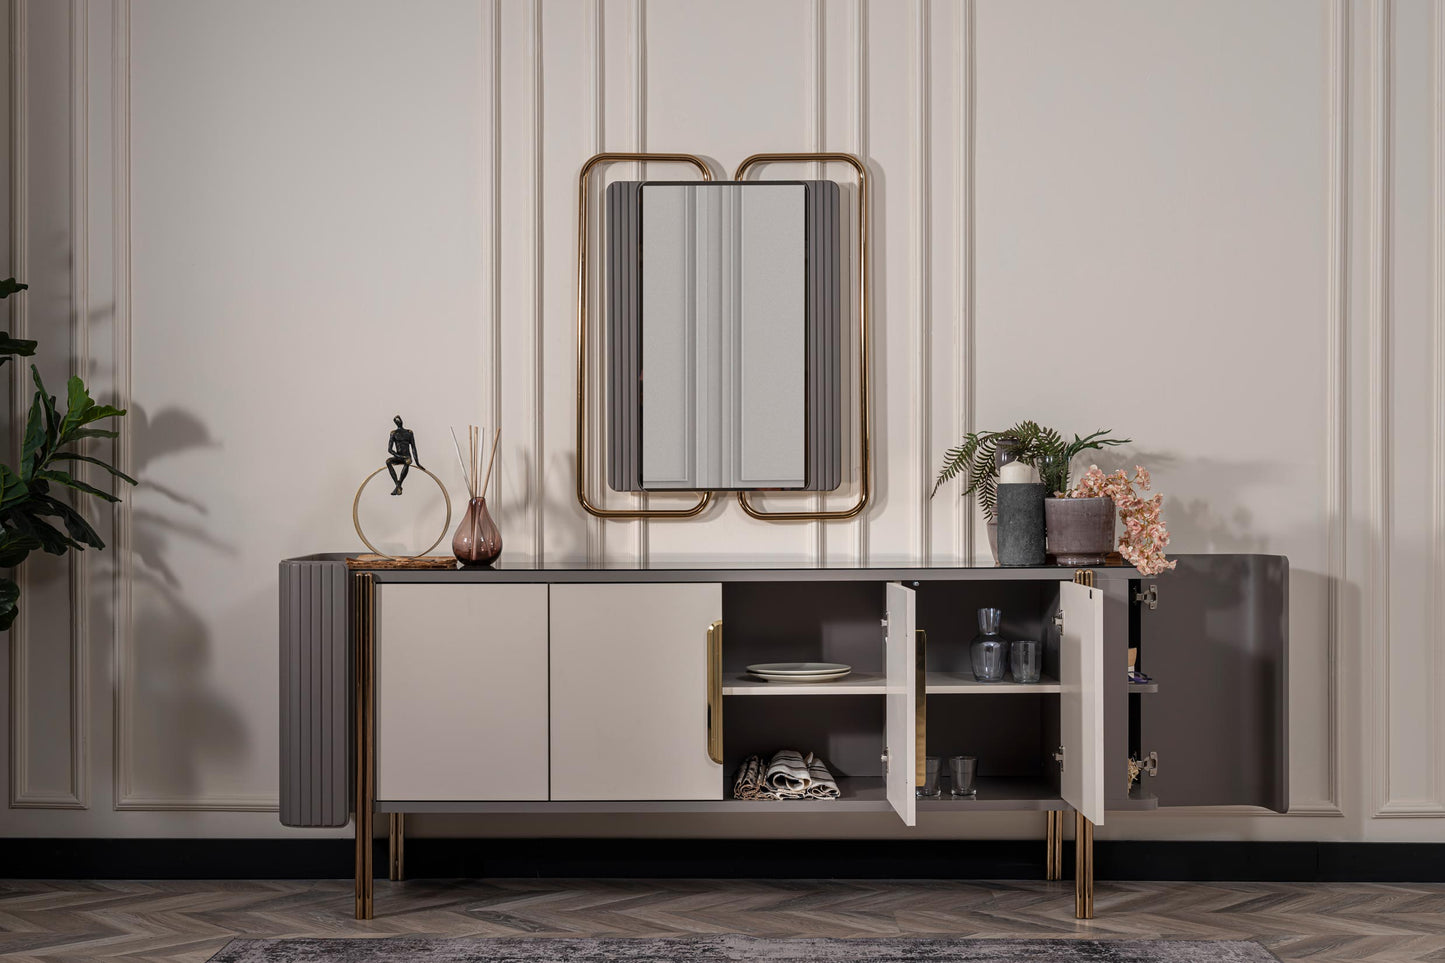 FLORYA - Buffet Cabinet with Mirror